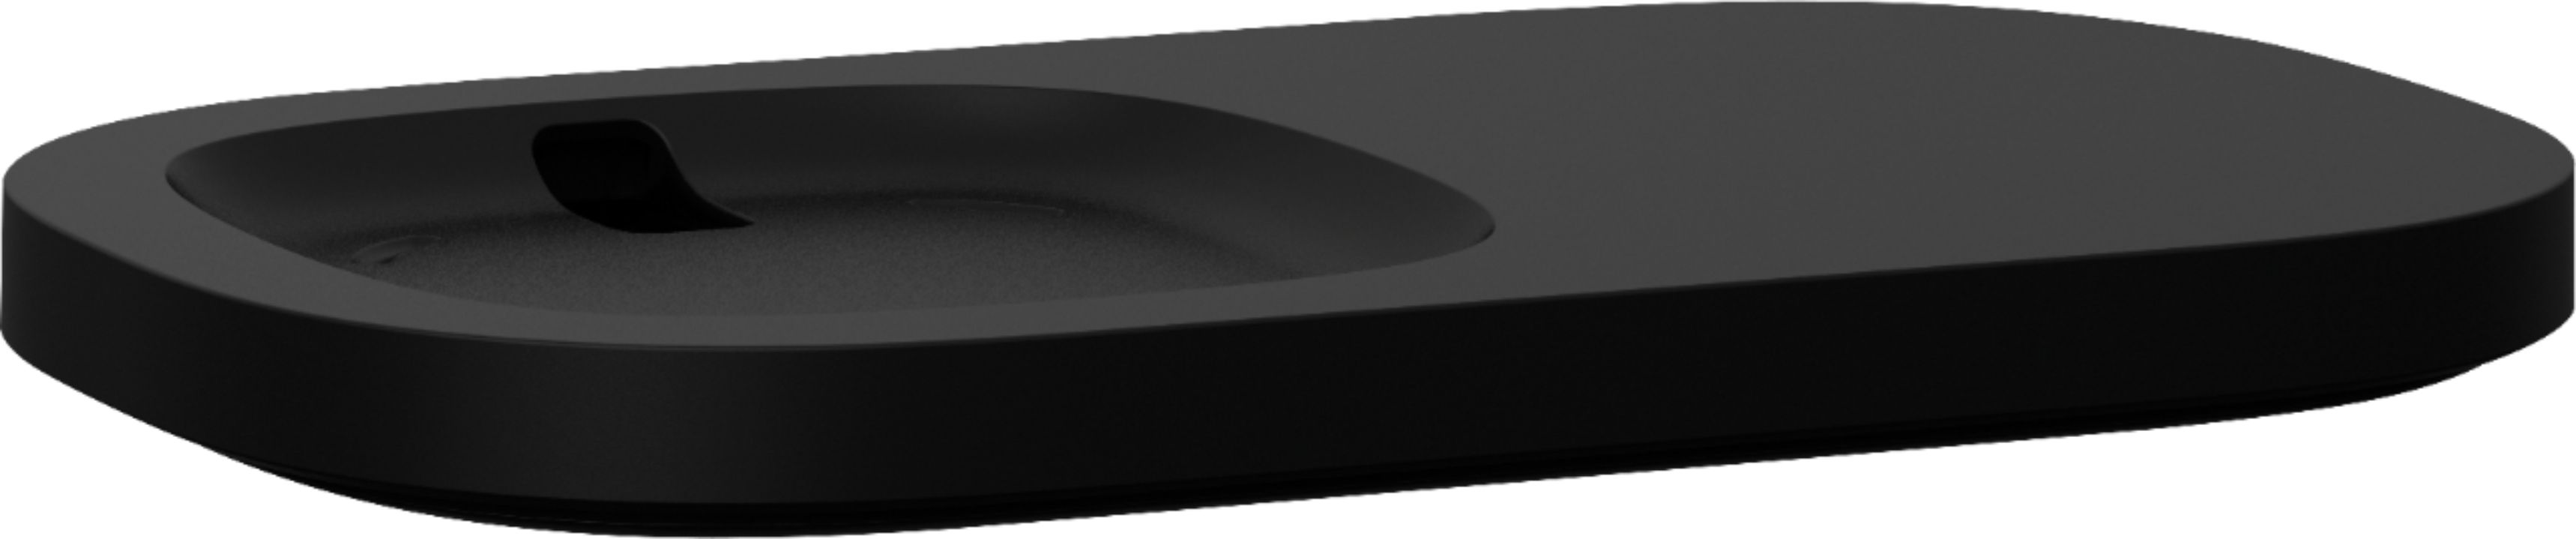 Angle View: Sonos - Combo Adapter - Black